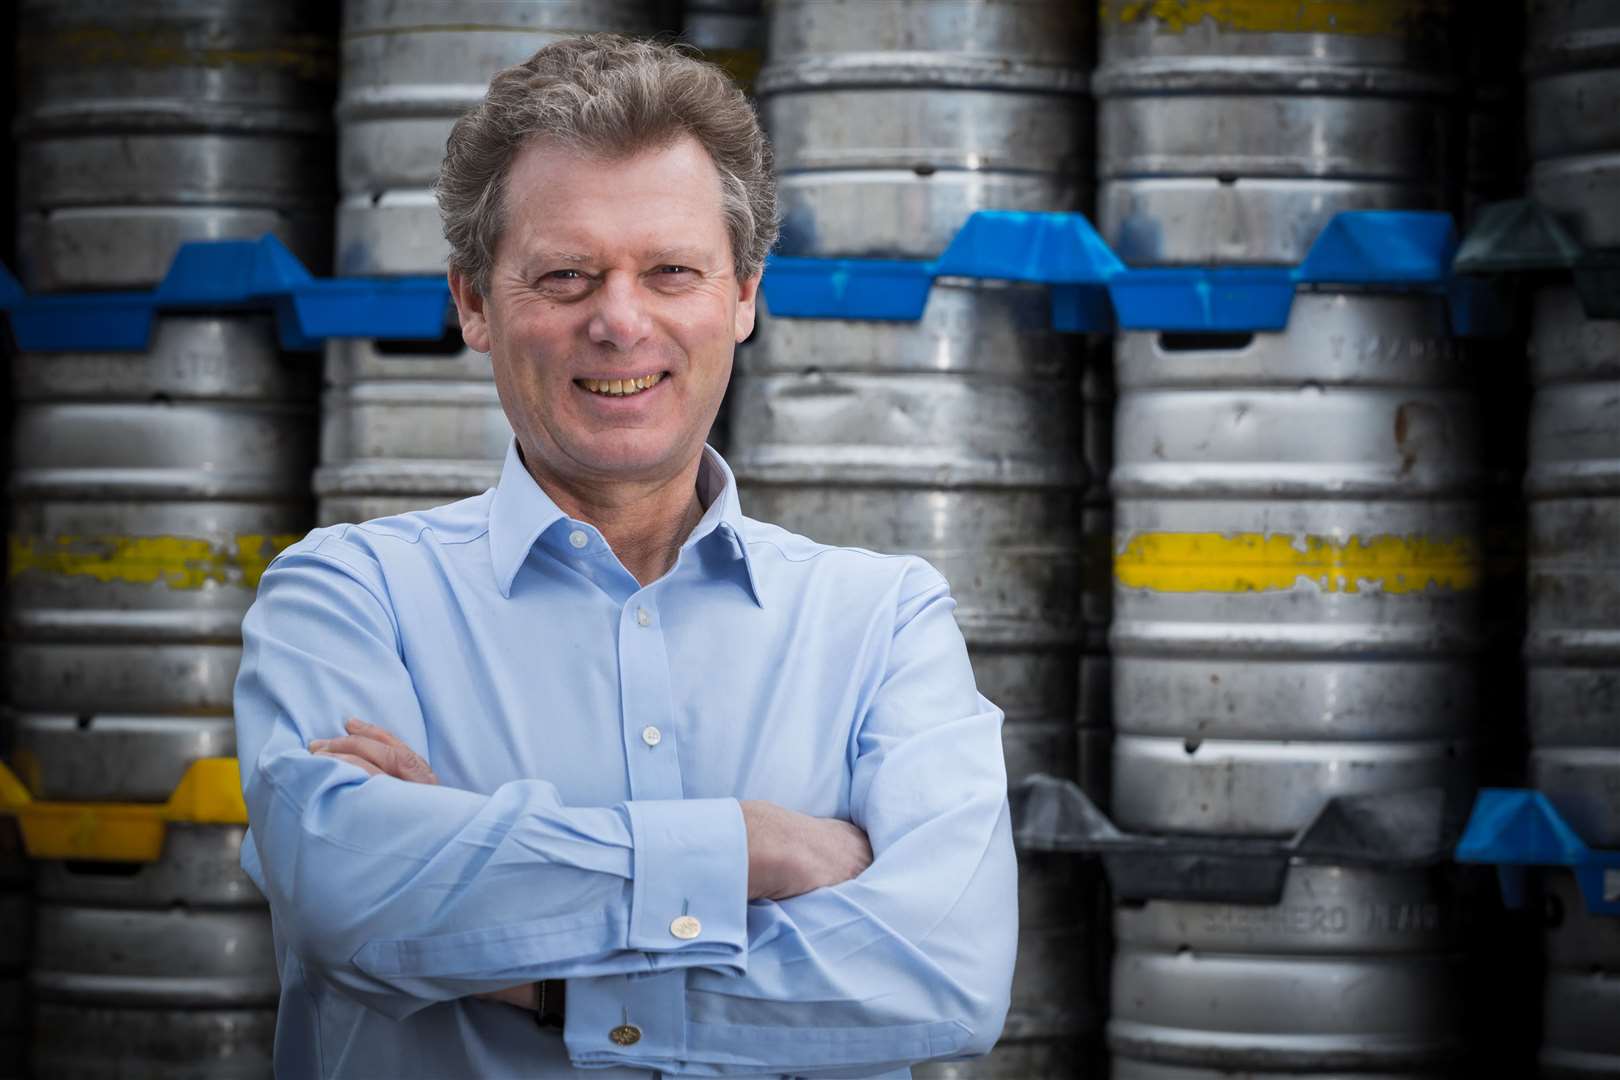 Shepherd Neame chief executive Jonathan Neame hopes an agreement can be reached to ease pressures on already struggling pubs and bars